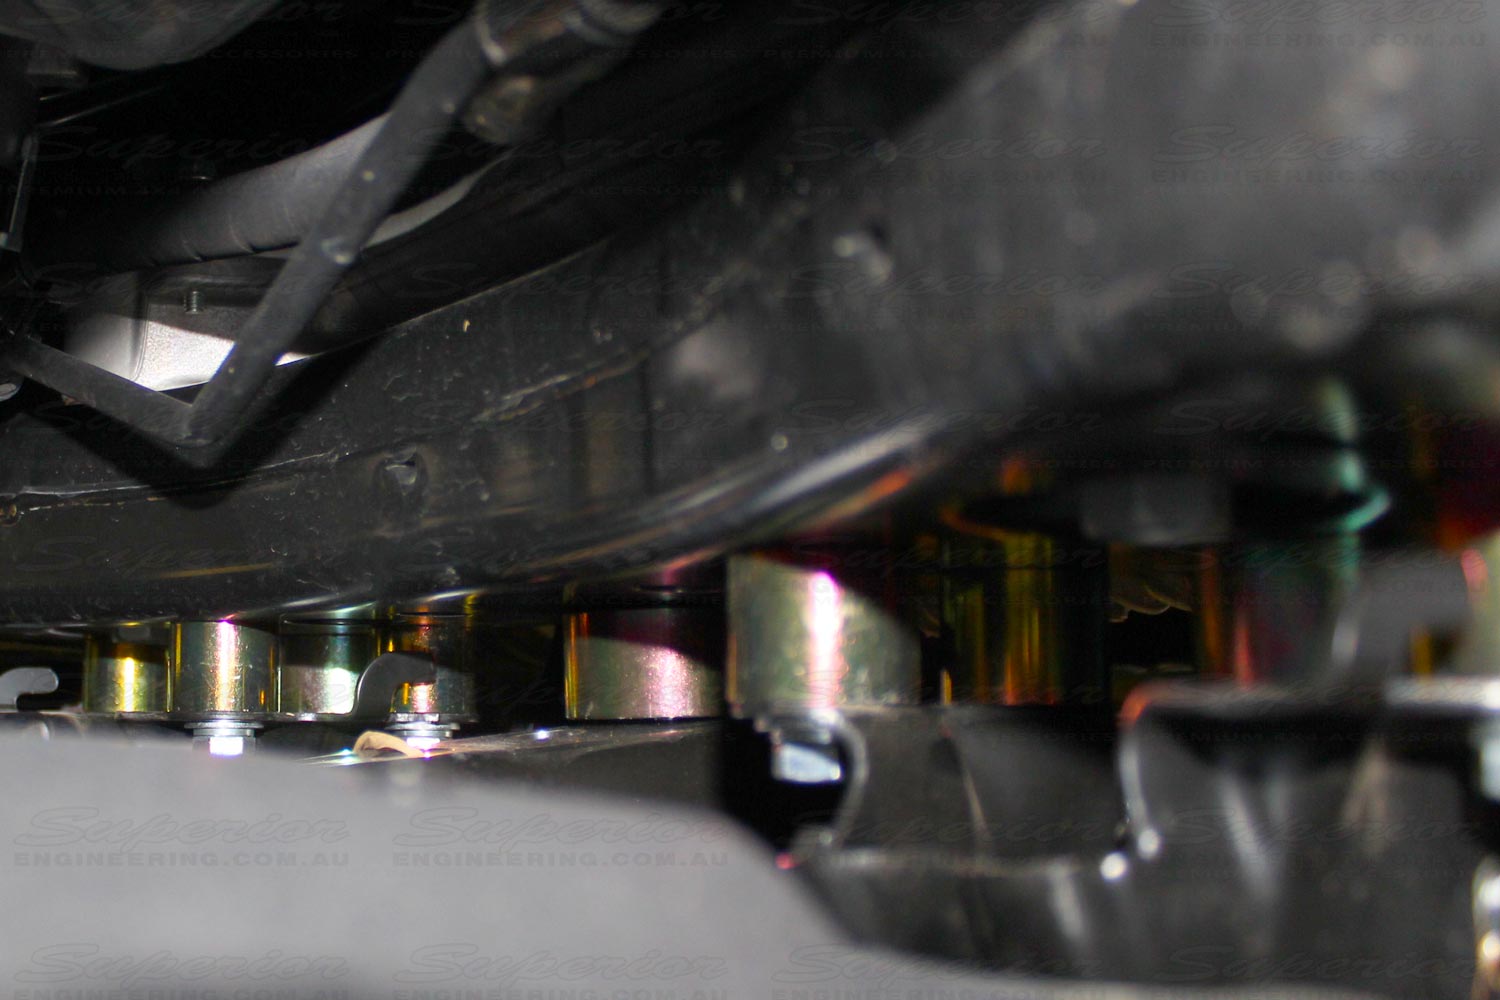 Closeup view of the Superior Diff Drop spacers fitted in the 200 Series